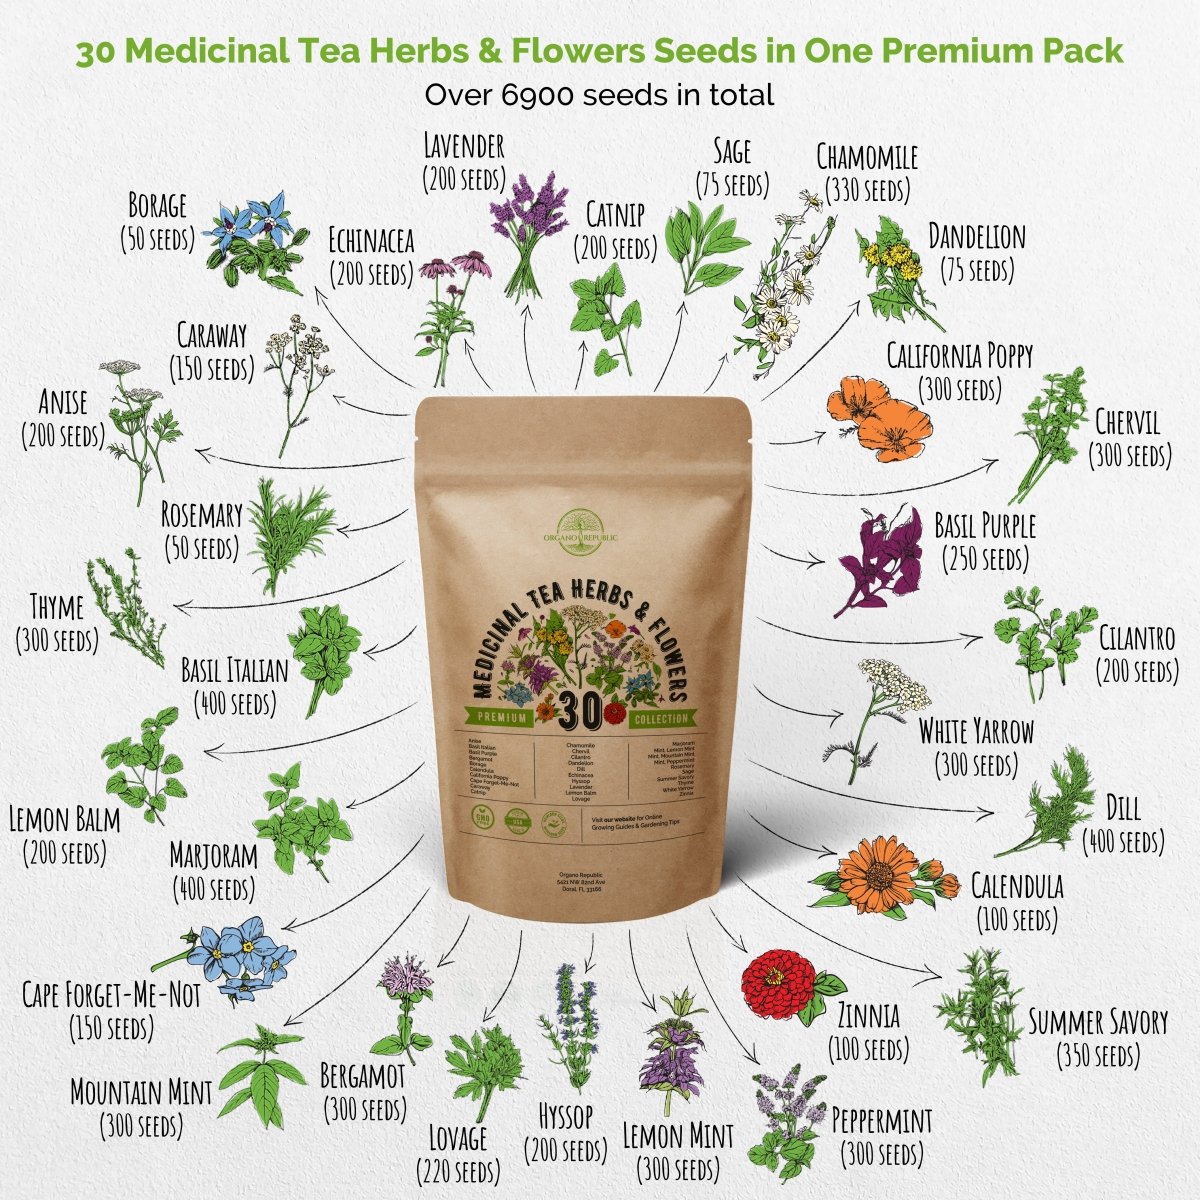 30 Medicinal Tea Herb & Flower Seeds Variety Pack for Planting Indoor & Outdoors. - Organo Republic